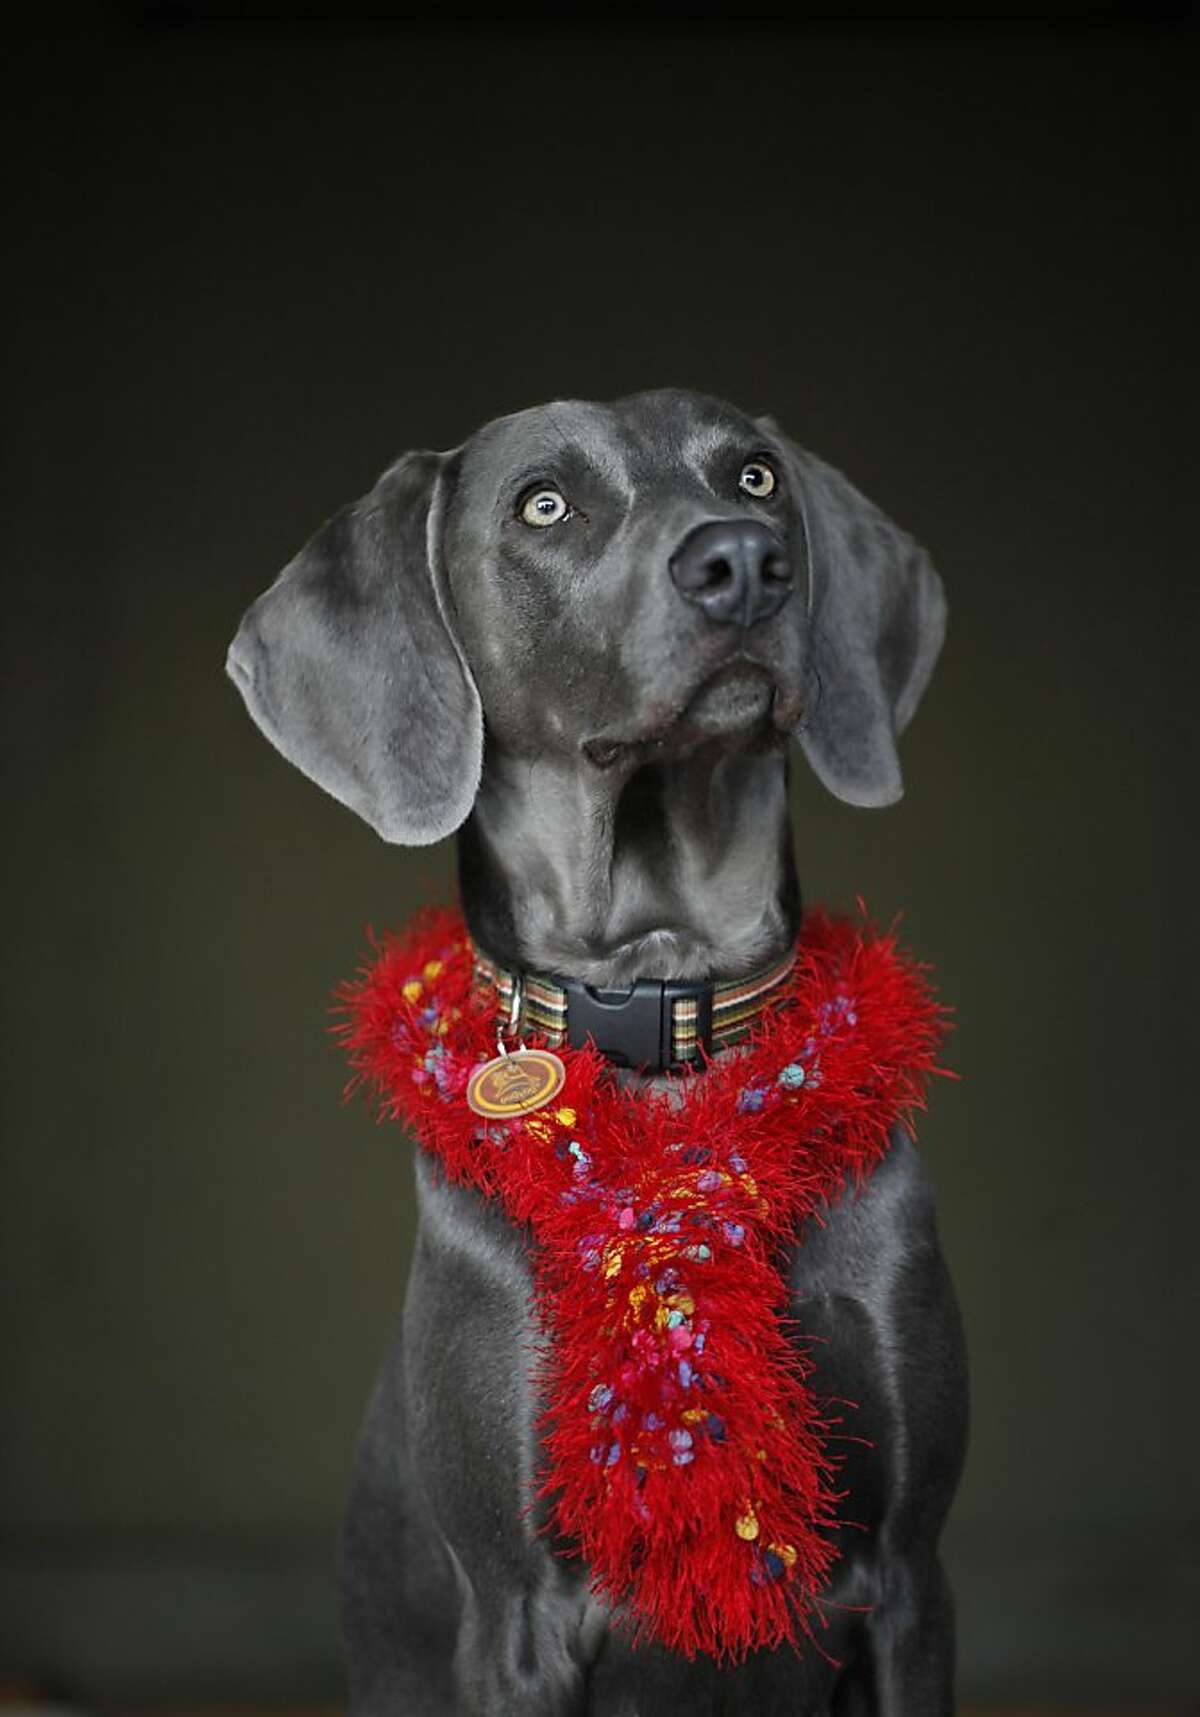 Cal Meeder poses his 1-year-old weimaraner, Luke, in a whimsical outfit on the evening before the dog was scheduled to receive a pair of testicle implants called Neuticles. "I'm sure part of it was just because I wanted to be different and heck why not. I thought it was fun," said Meeder.